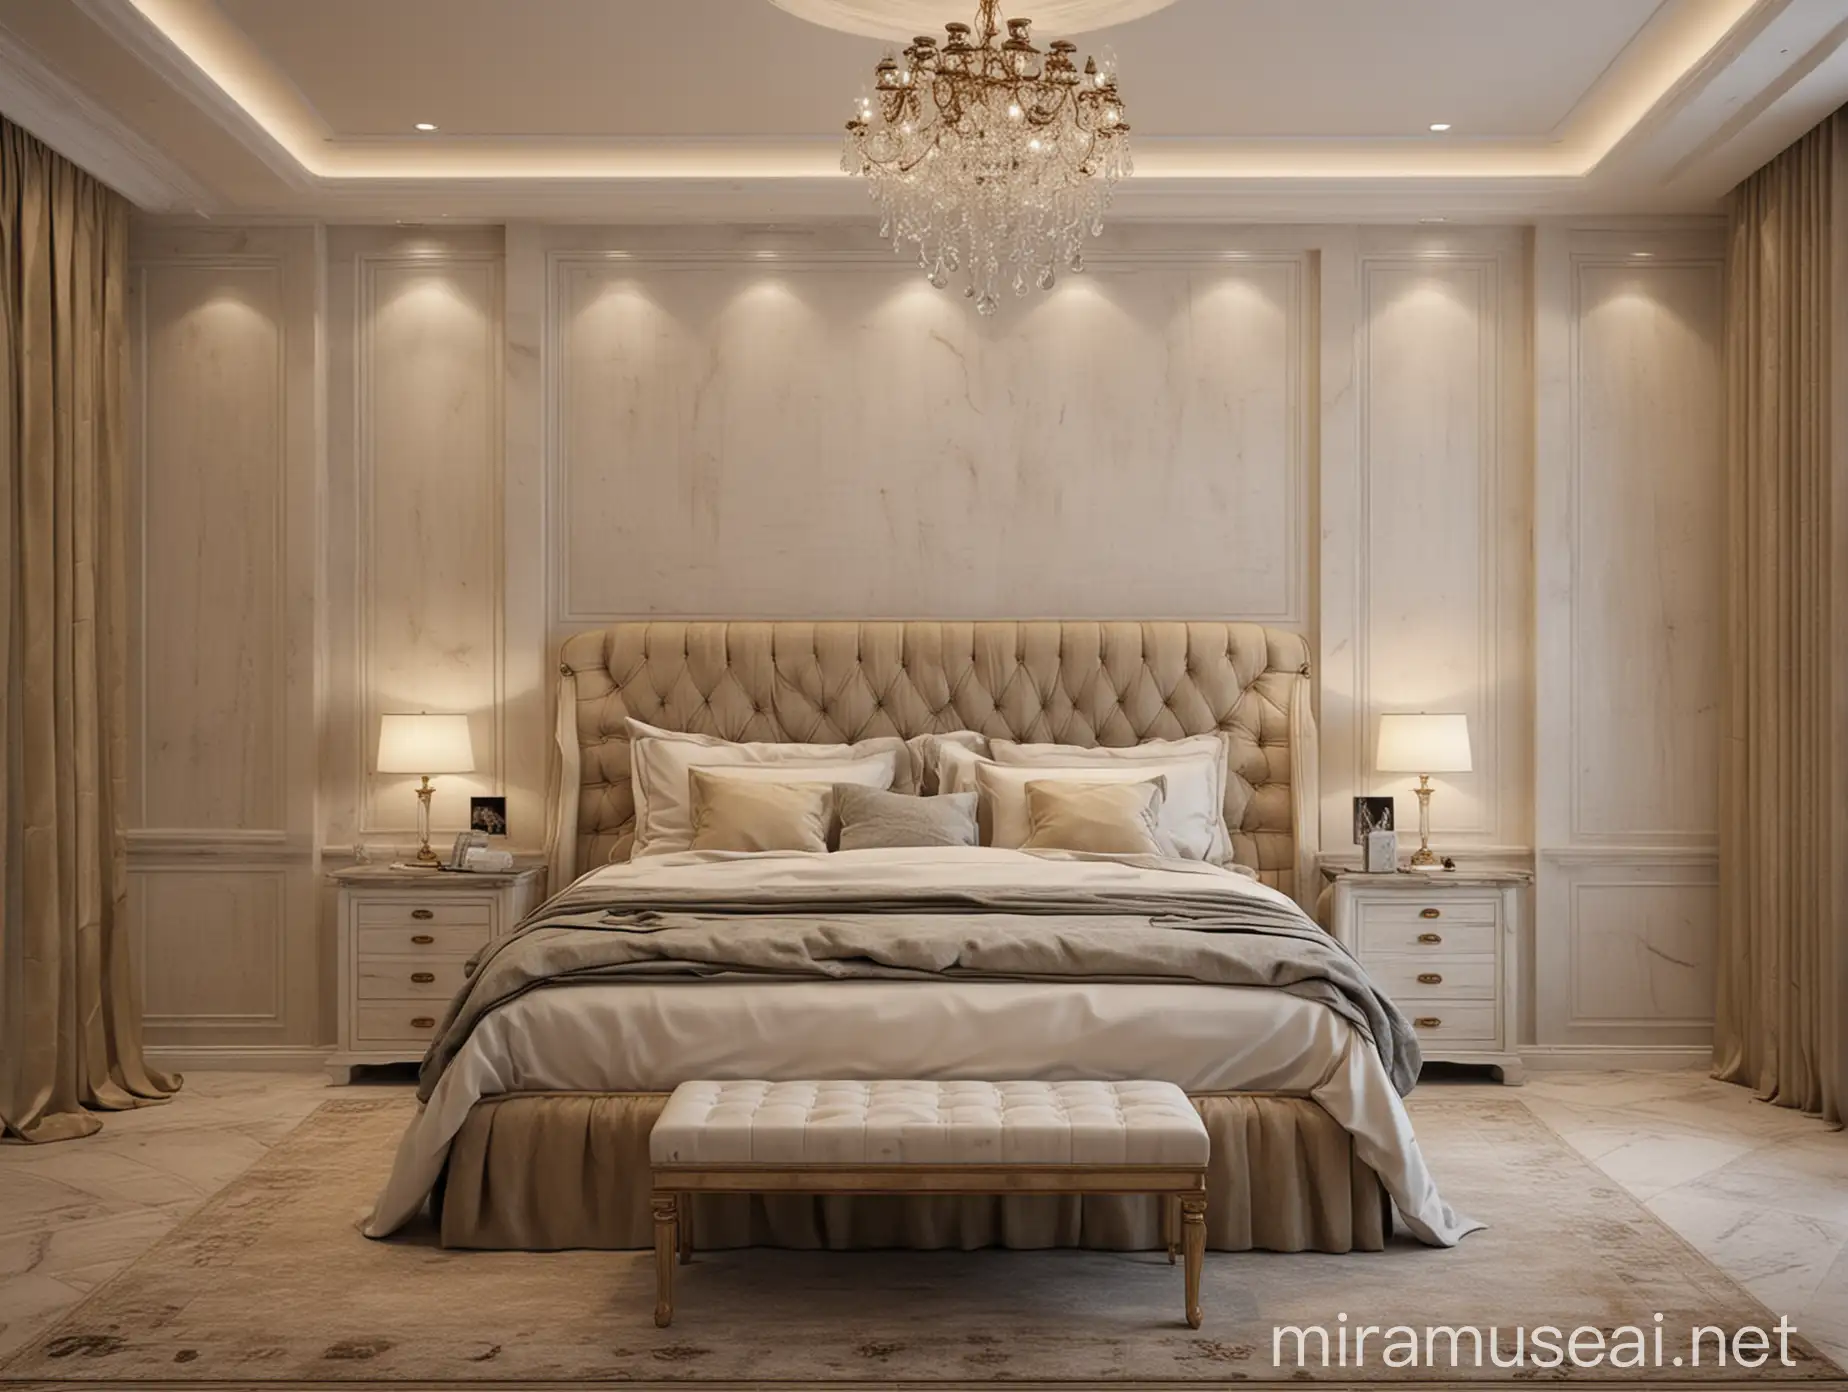 Luxurious Roman Style Bedroom Design with Elegant Bed Wall